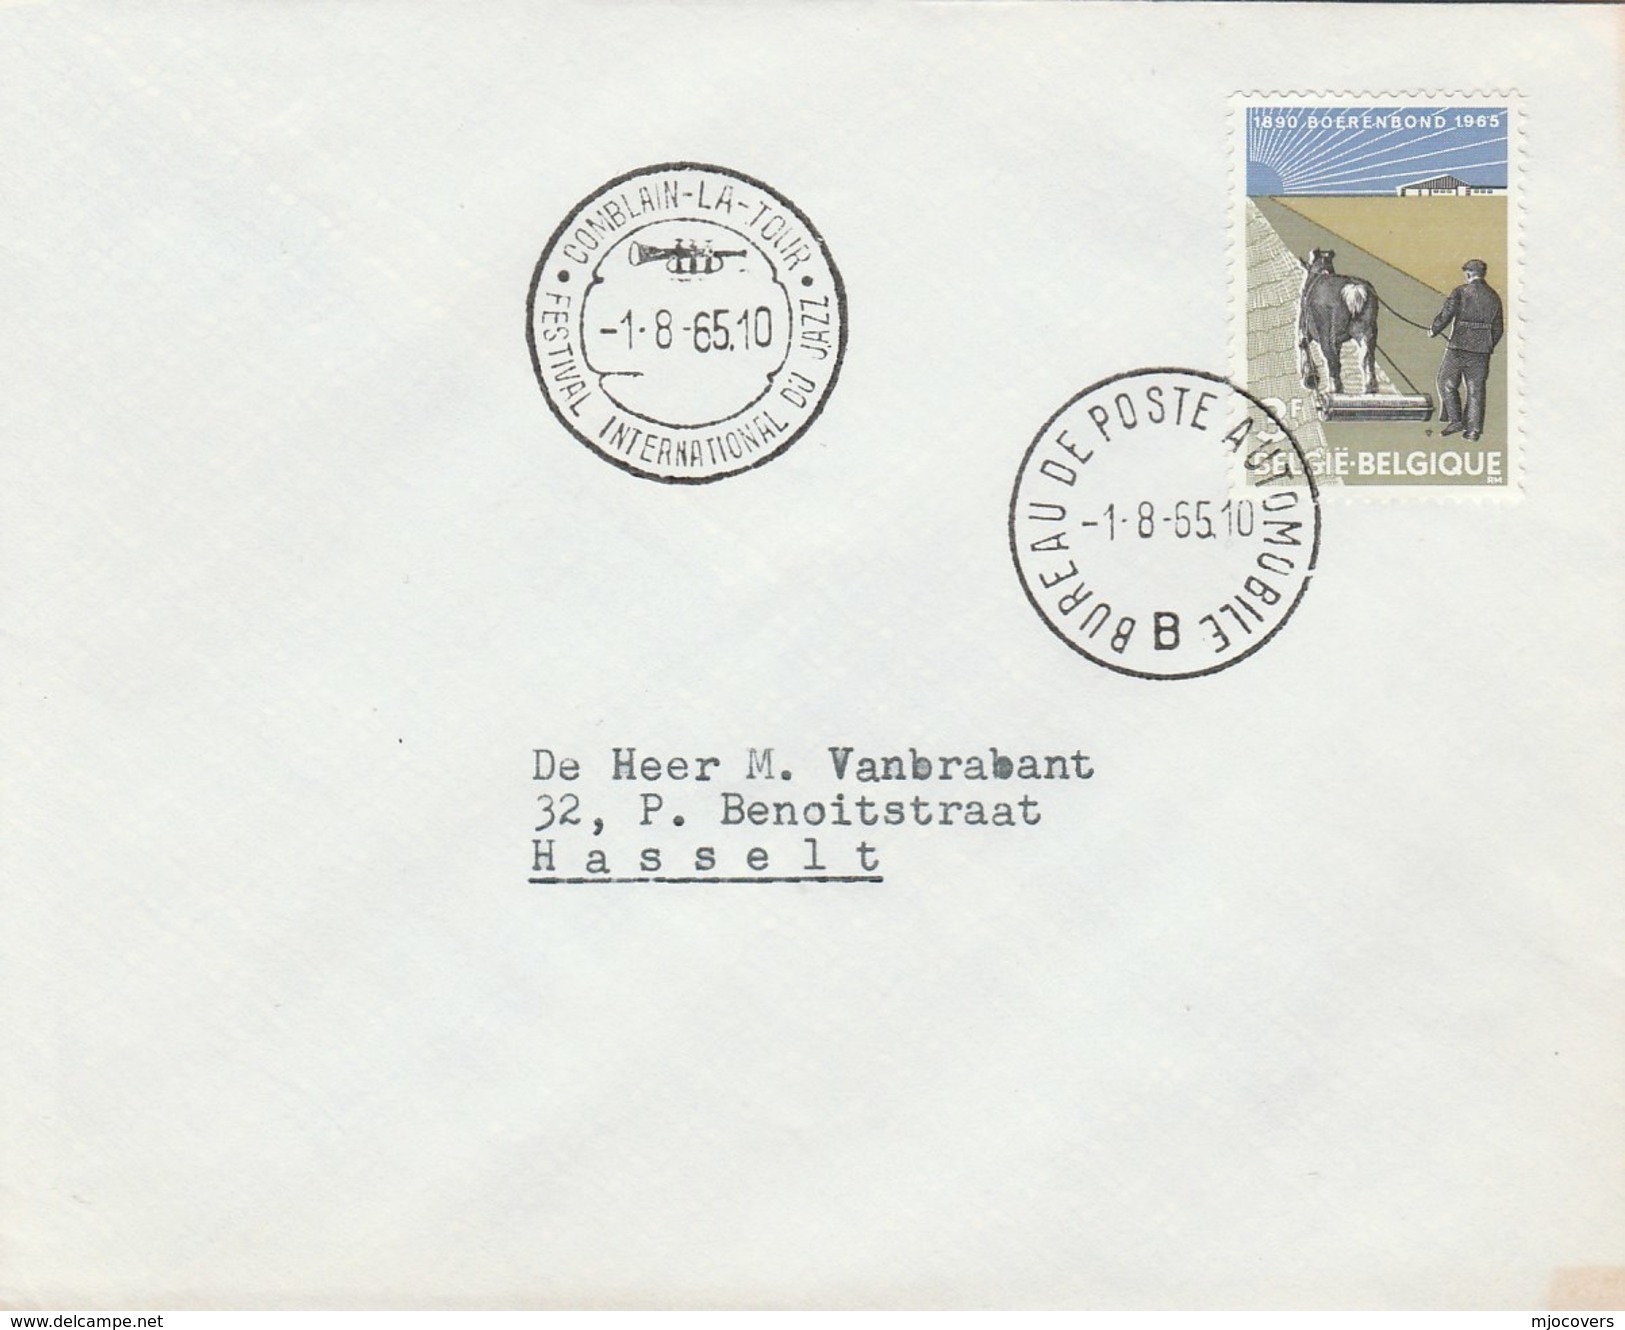 1965 BELGIUM COVER EVENT Pmk JAZZ INTERNATIONAL FESTIVAL, TRUMPET Music Stamps Horse Ploughing Agriculture - Music